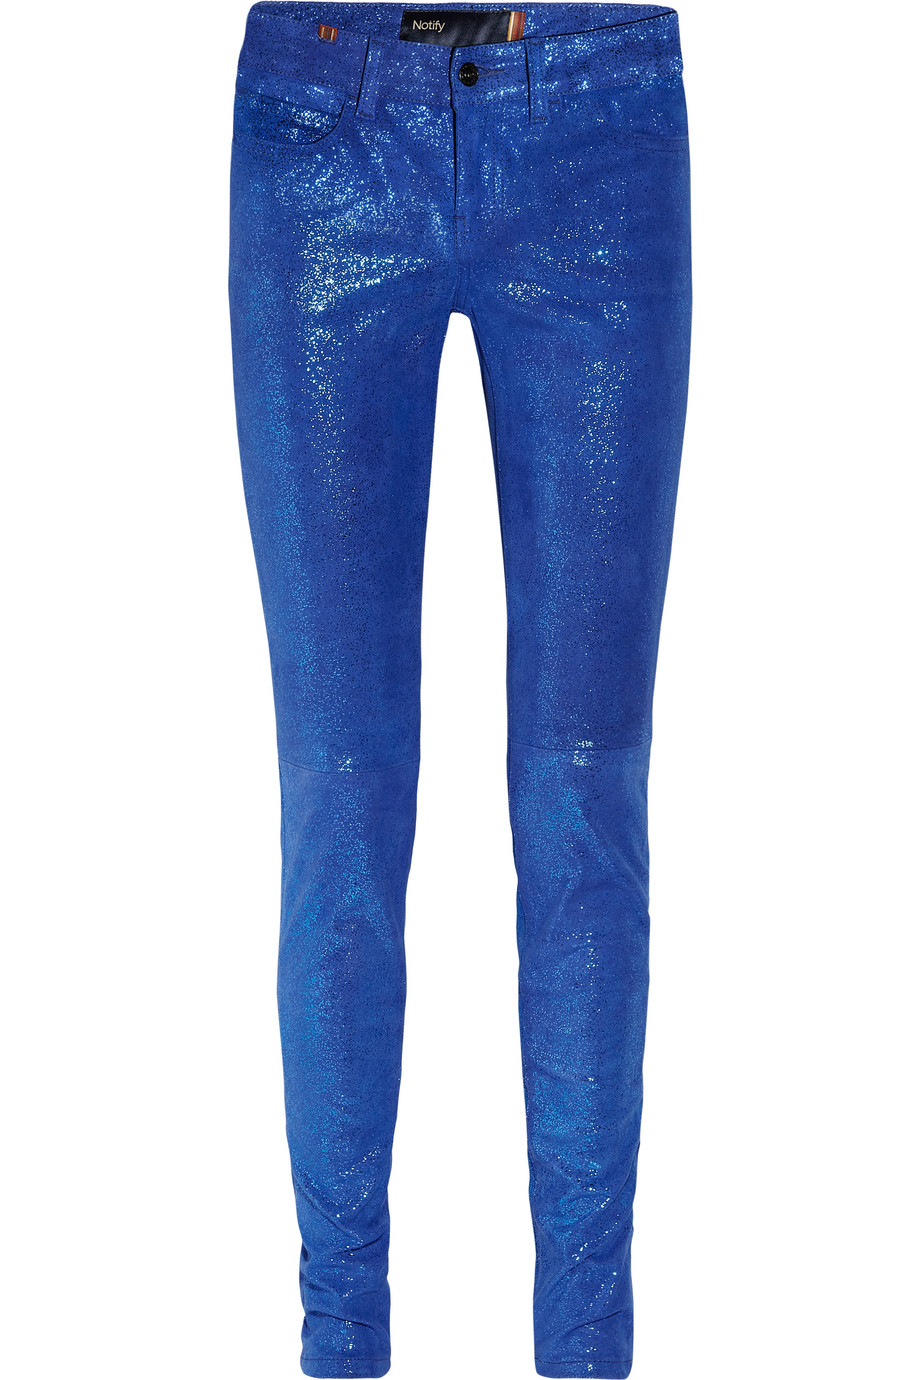 Lyst - Notify Bamboo Glitter-finish Stretch-leather Skinny Pants in Blue